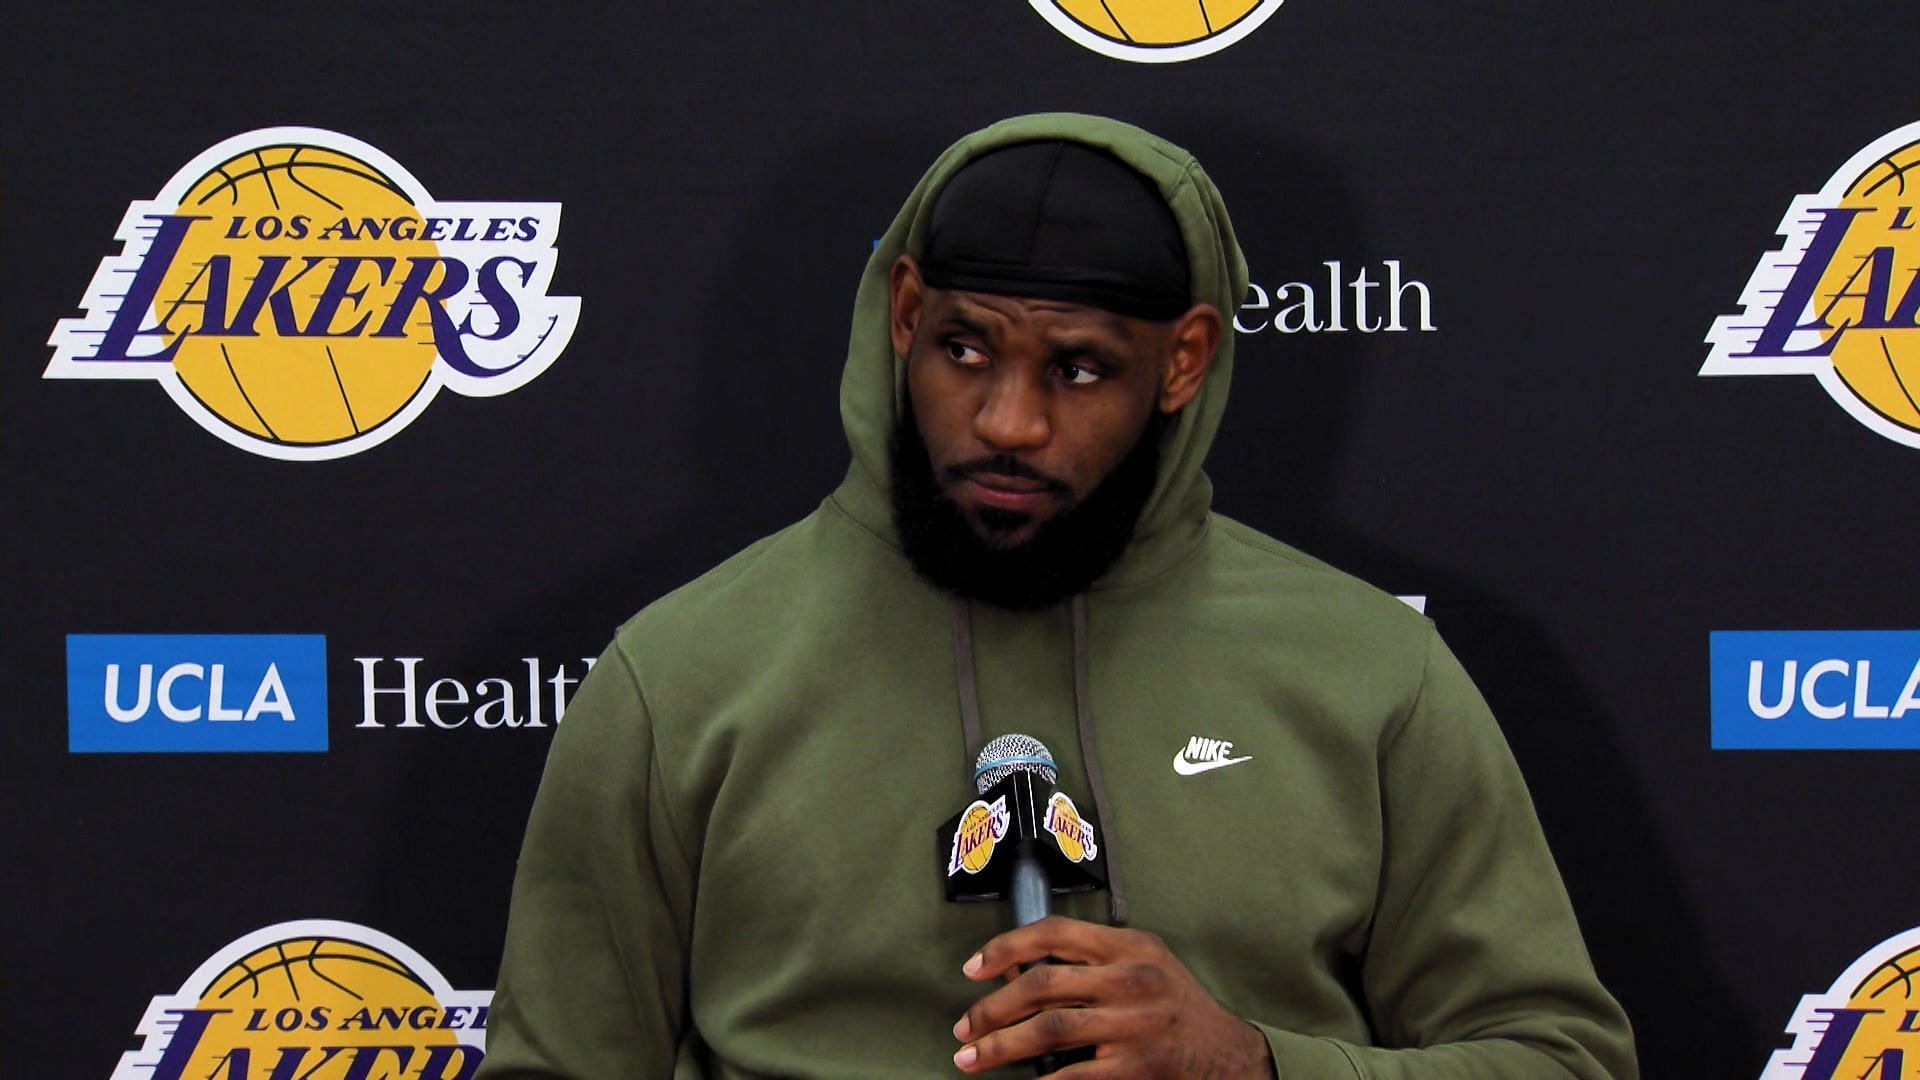 LeBron James only had nice words for Laker fans who jeered them playing against the New Orleans Pelicans [Photo: NBA.com]